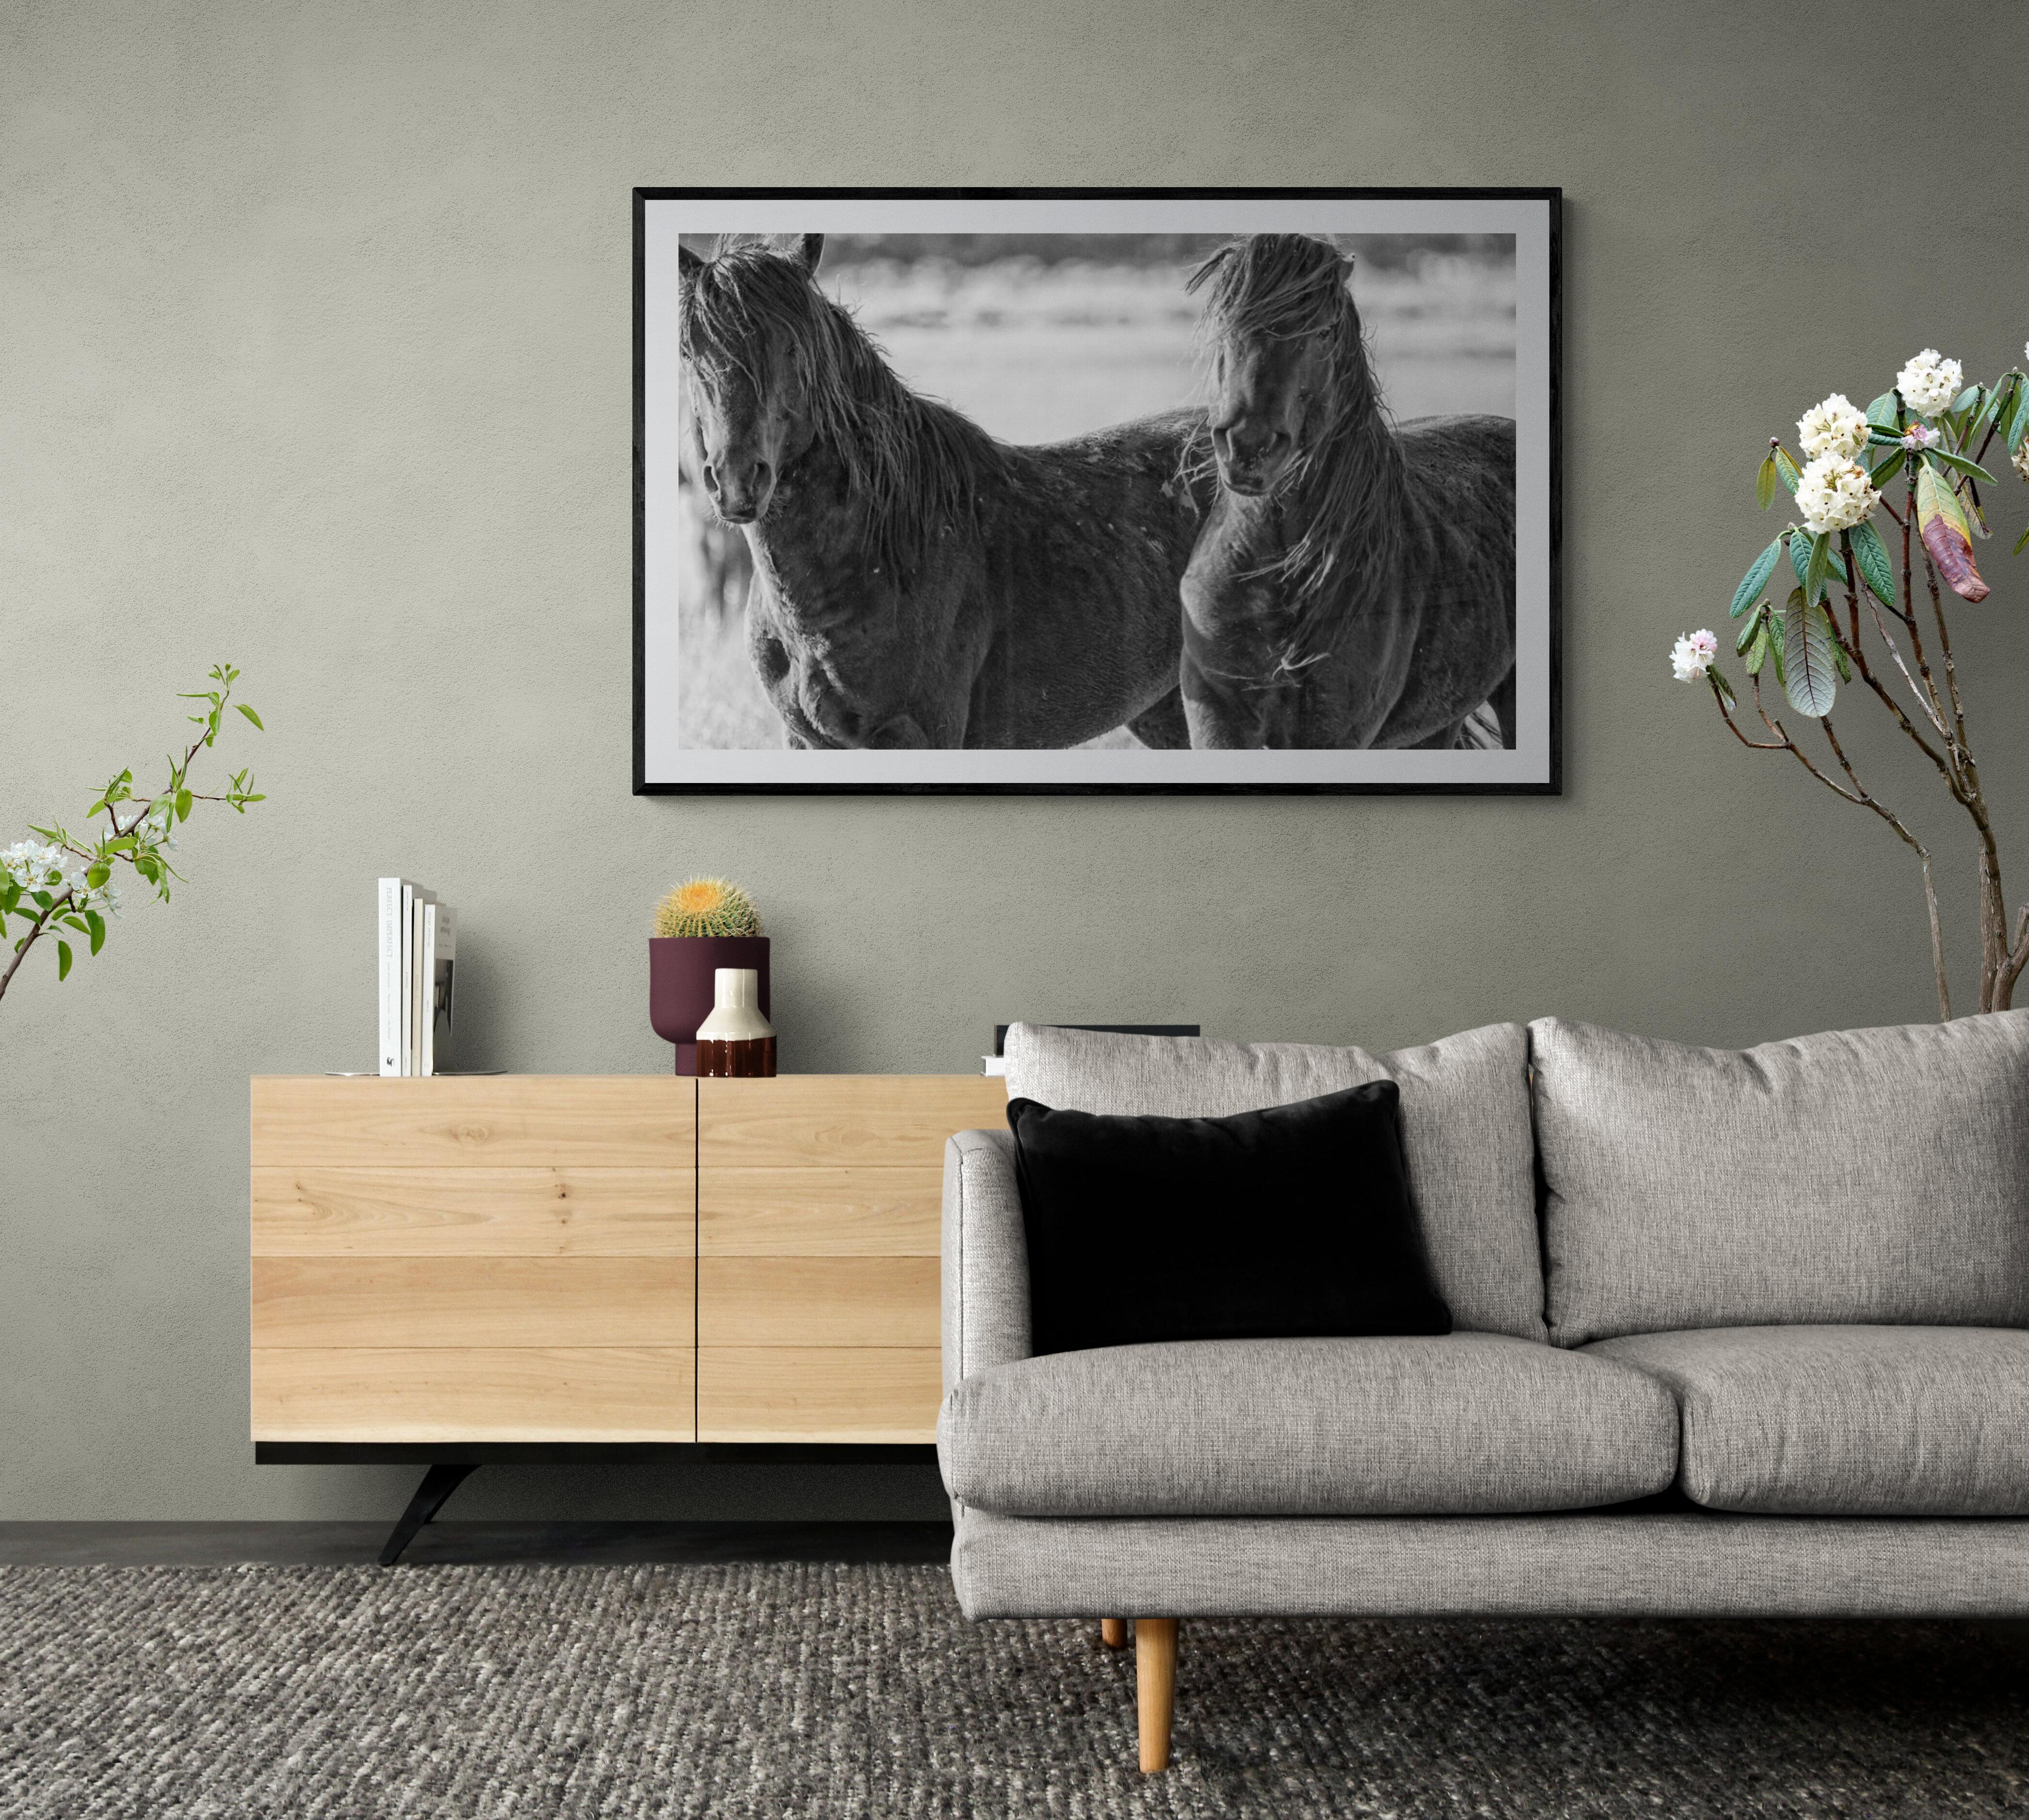 24x40 Band of Brothers - Photography of Wild Horses(Special 1stdibs Price) - Print by Shane Russeck